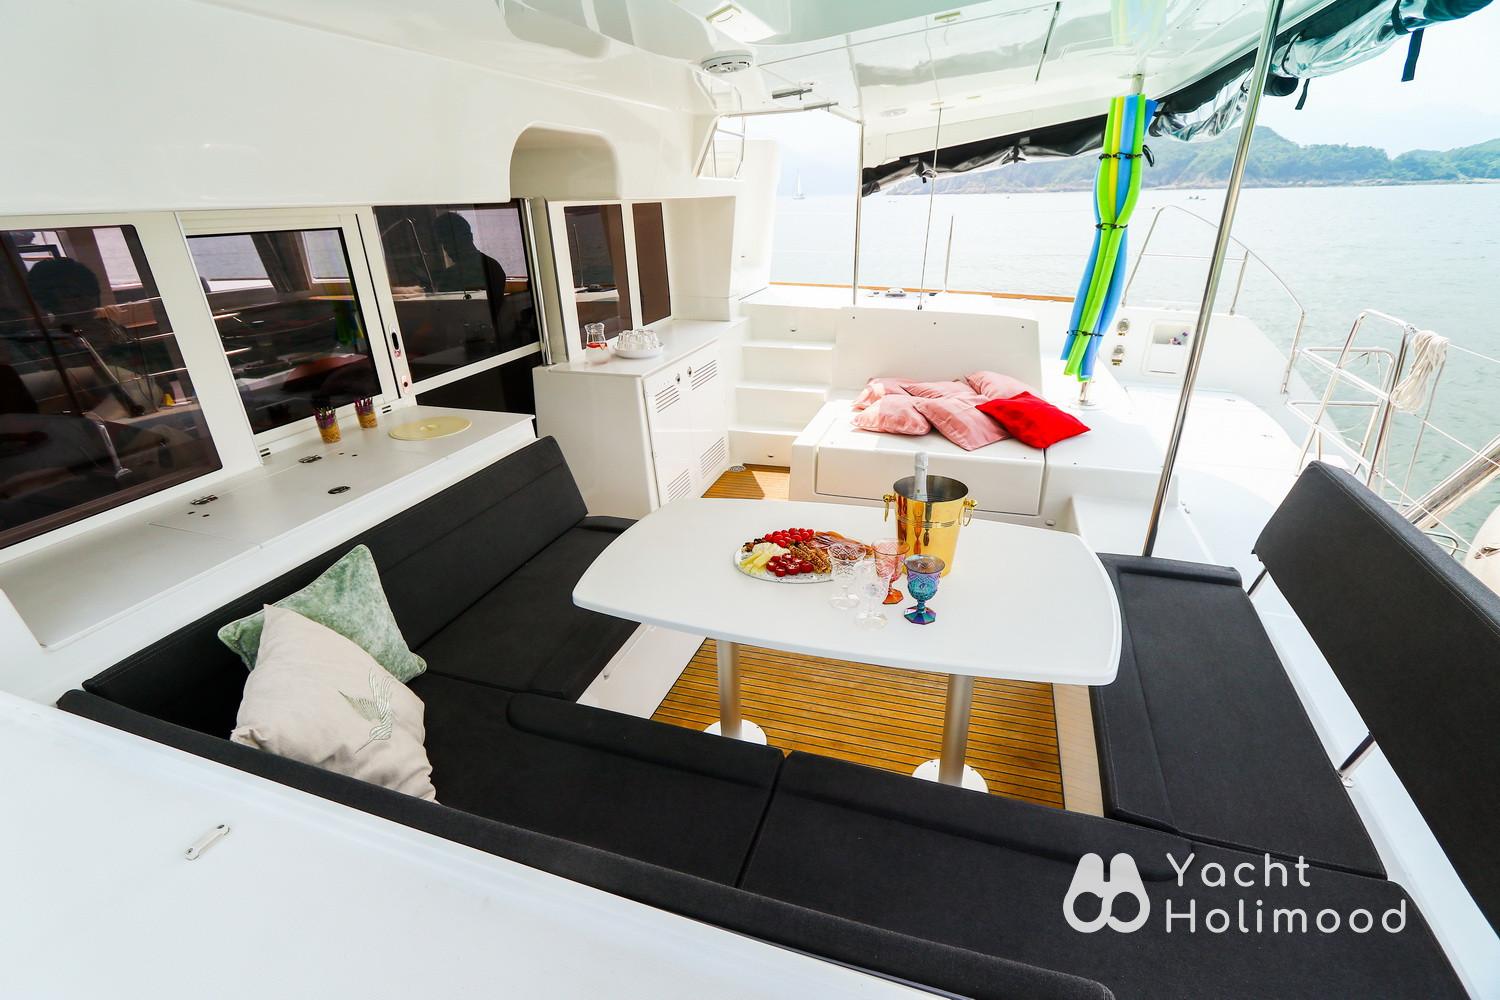 SL03 48-Hour Lagoon 450F 8-hour Luxury Sailing Day Trip (Pick Up at Sai Kung) 9